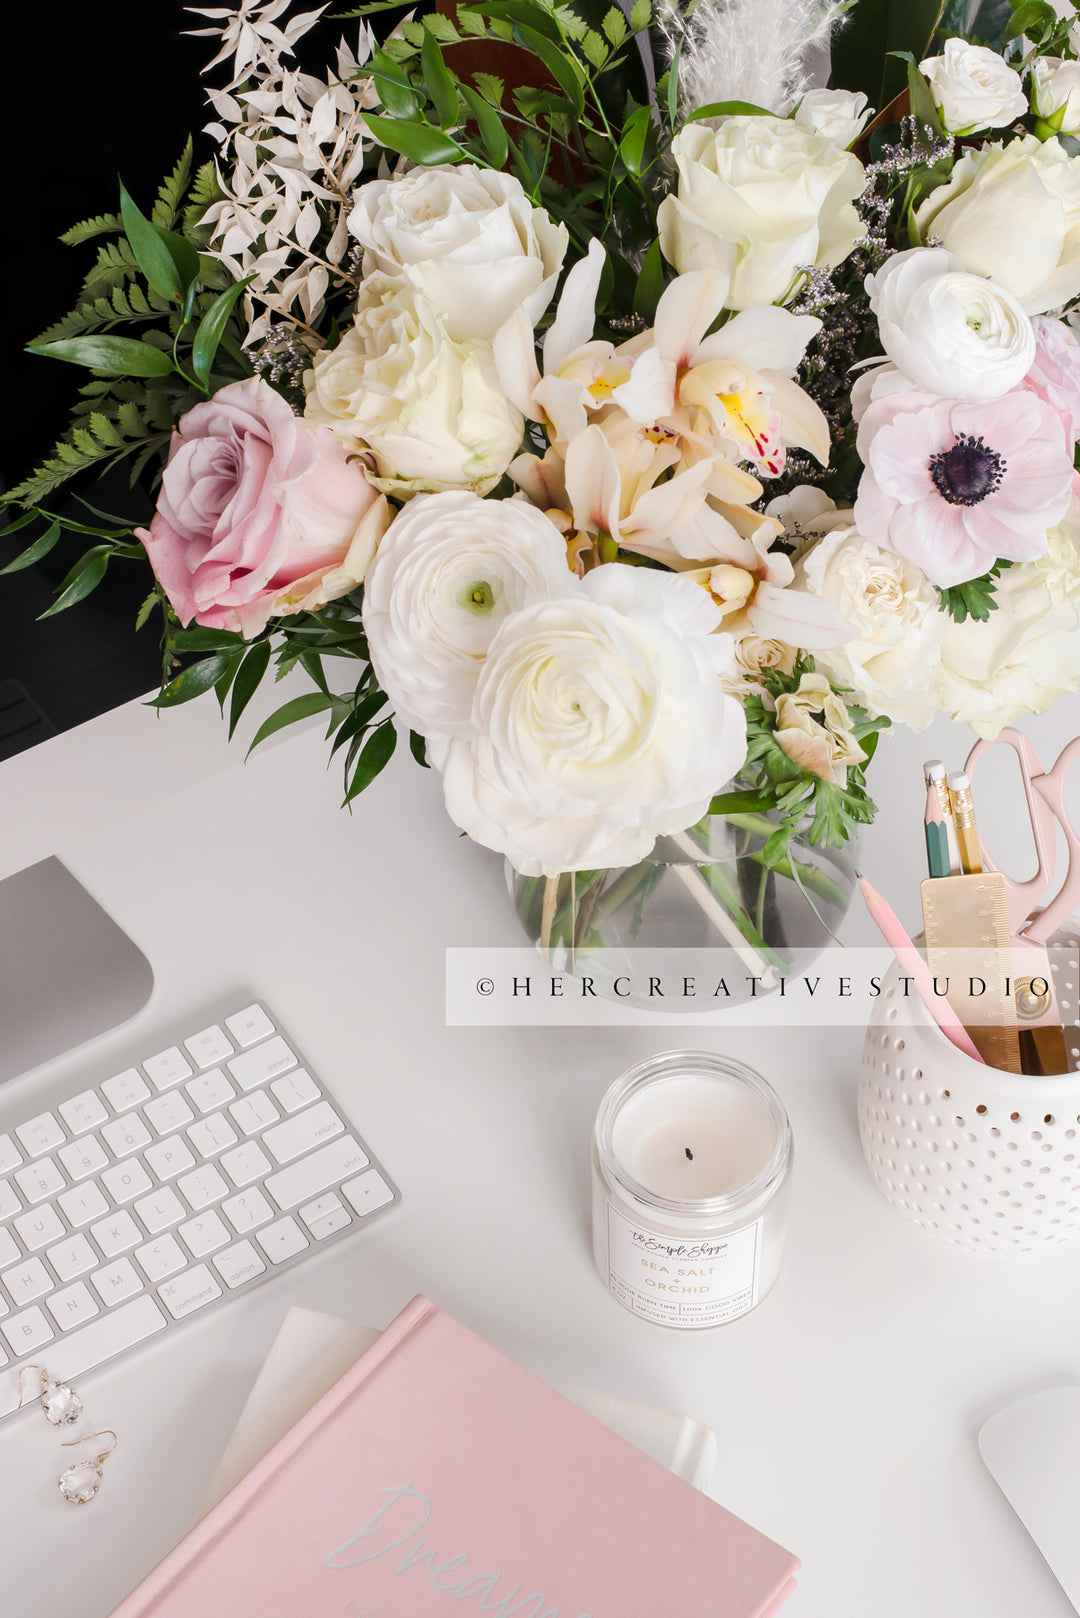 Flowers & Candle on Workspace, Styled Stock Image